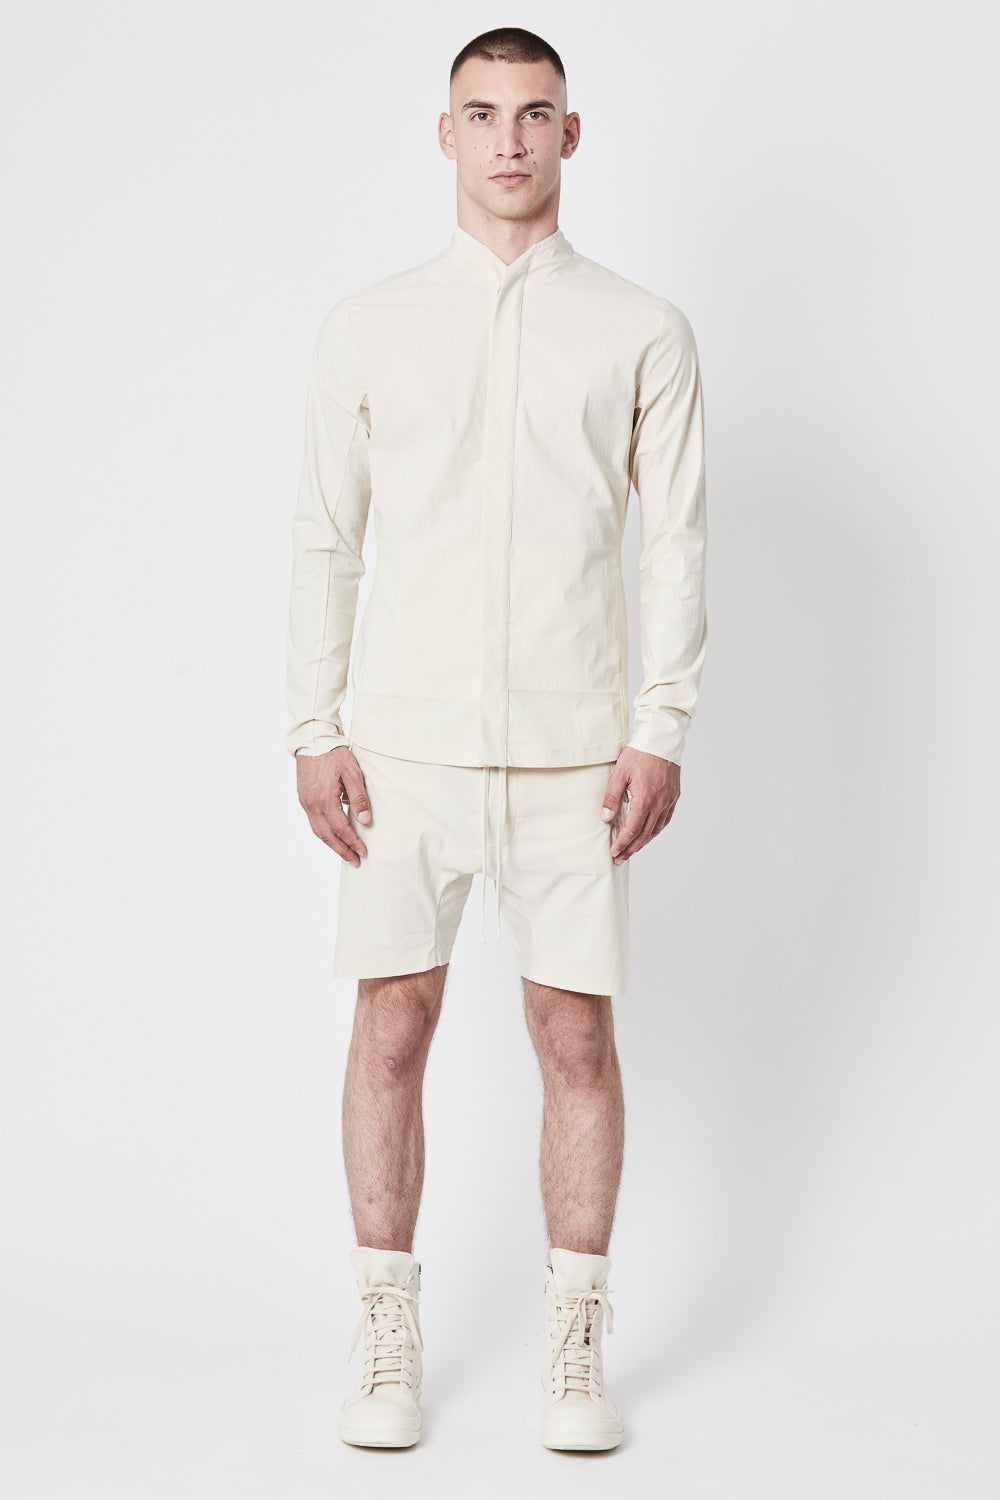 Buy the Thom Krom M SJ 580 Jacket in Ivory at Intro. Spend £50 for free UK delivery. Official stockists. We ship worldwide.